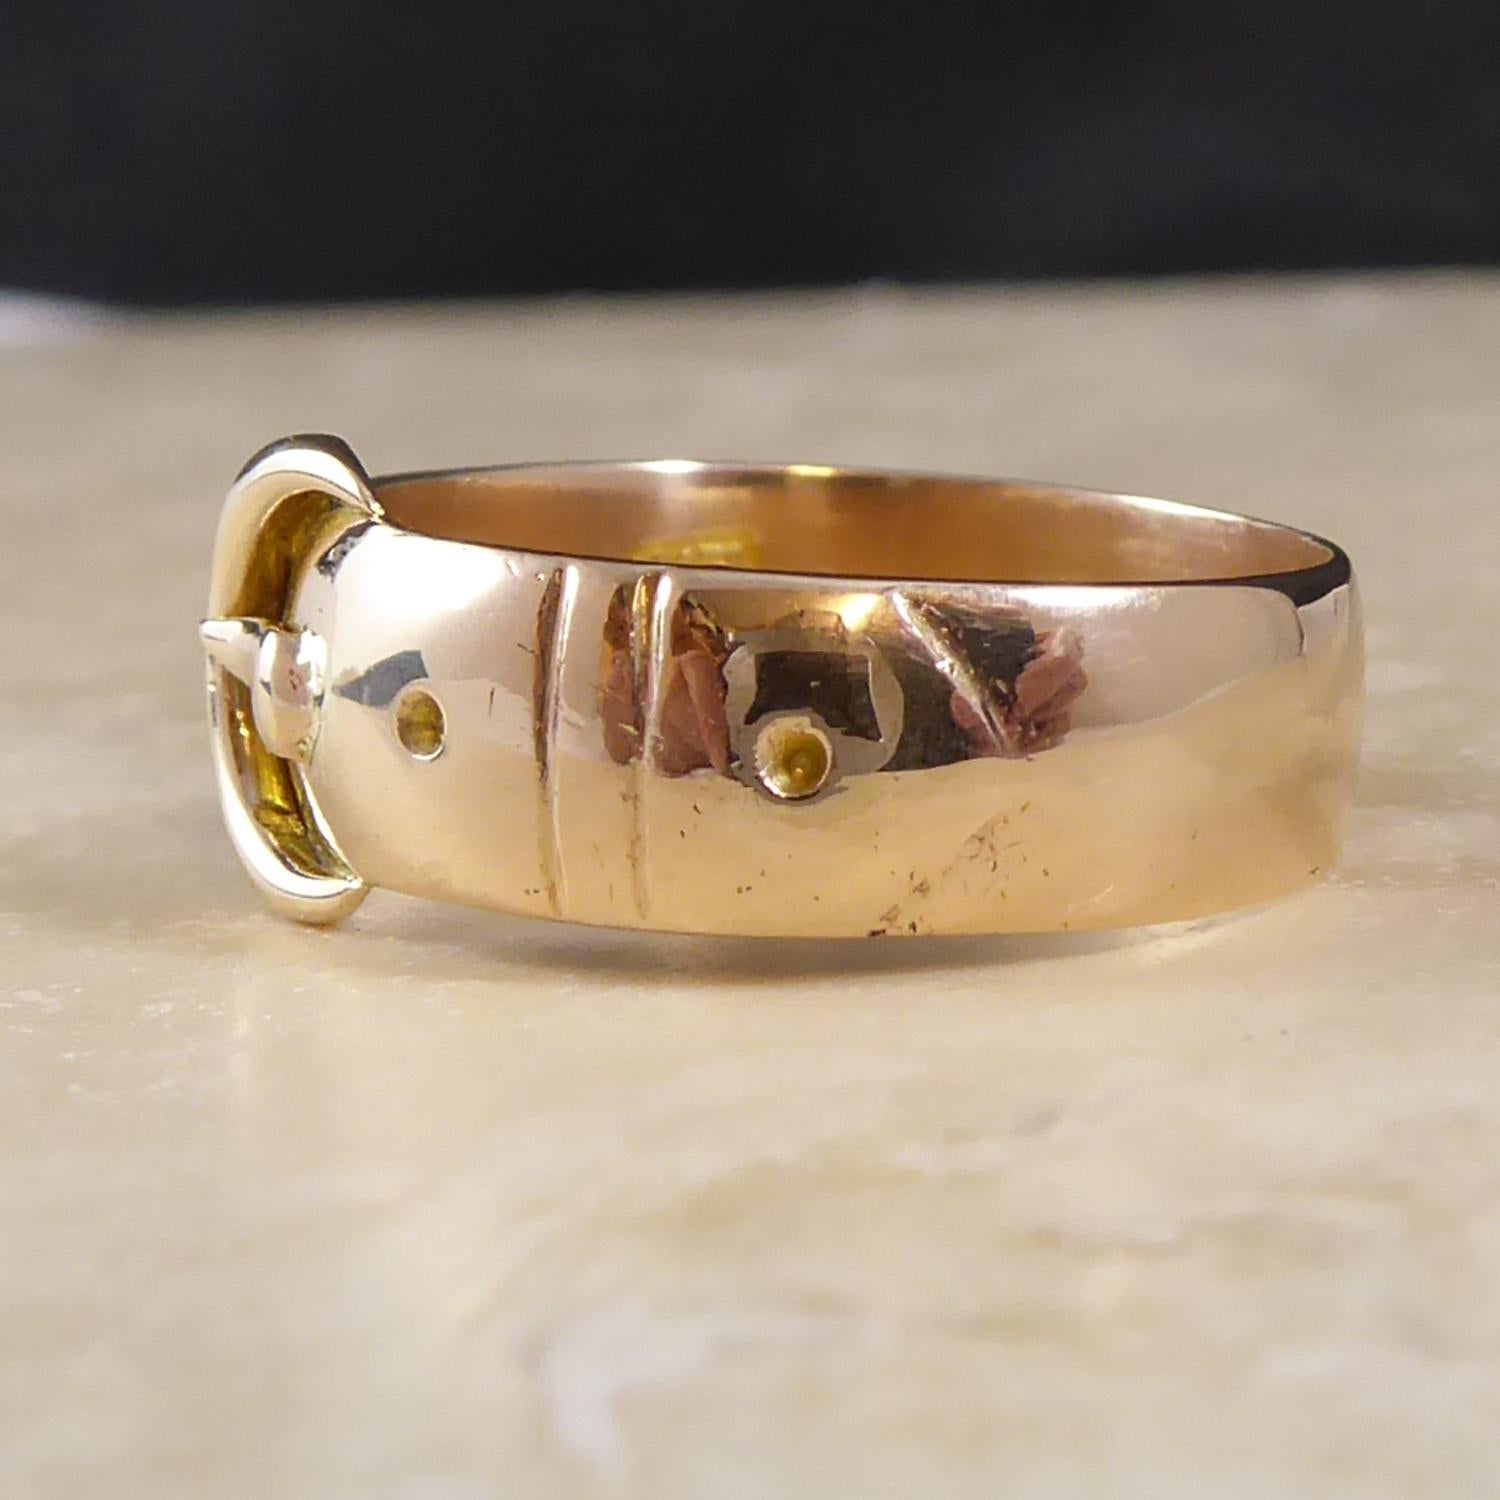 Crafted in 9ct rose gold, this lovely antique buckle ring was hallmarked at the collectible Chester Assay Office in 1895.  The buckled belt was a popular design for gold band rings during the Victorian era.  This lovely example measures approx.